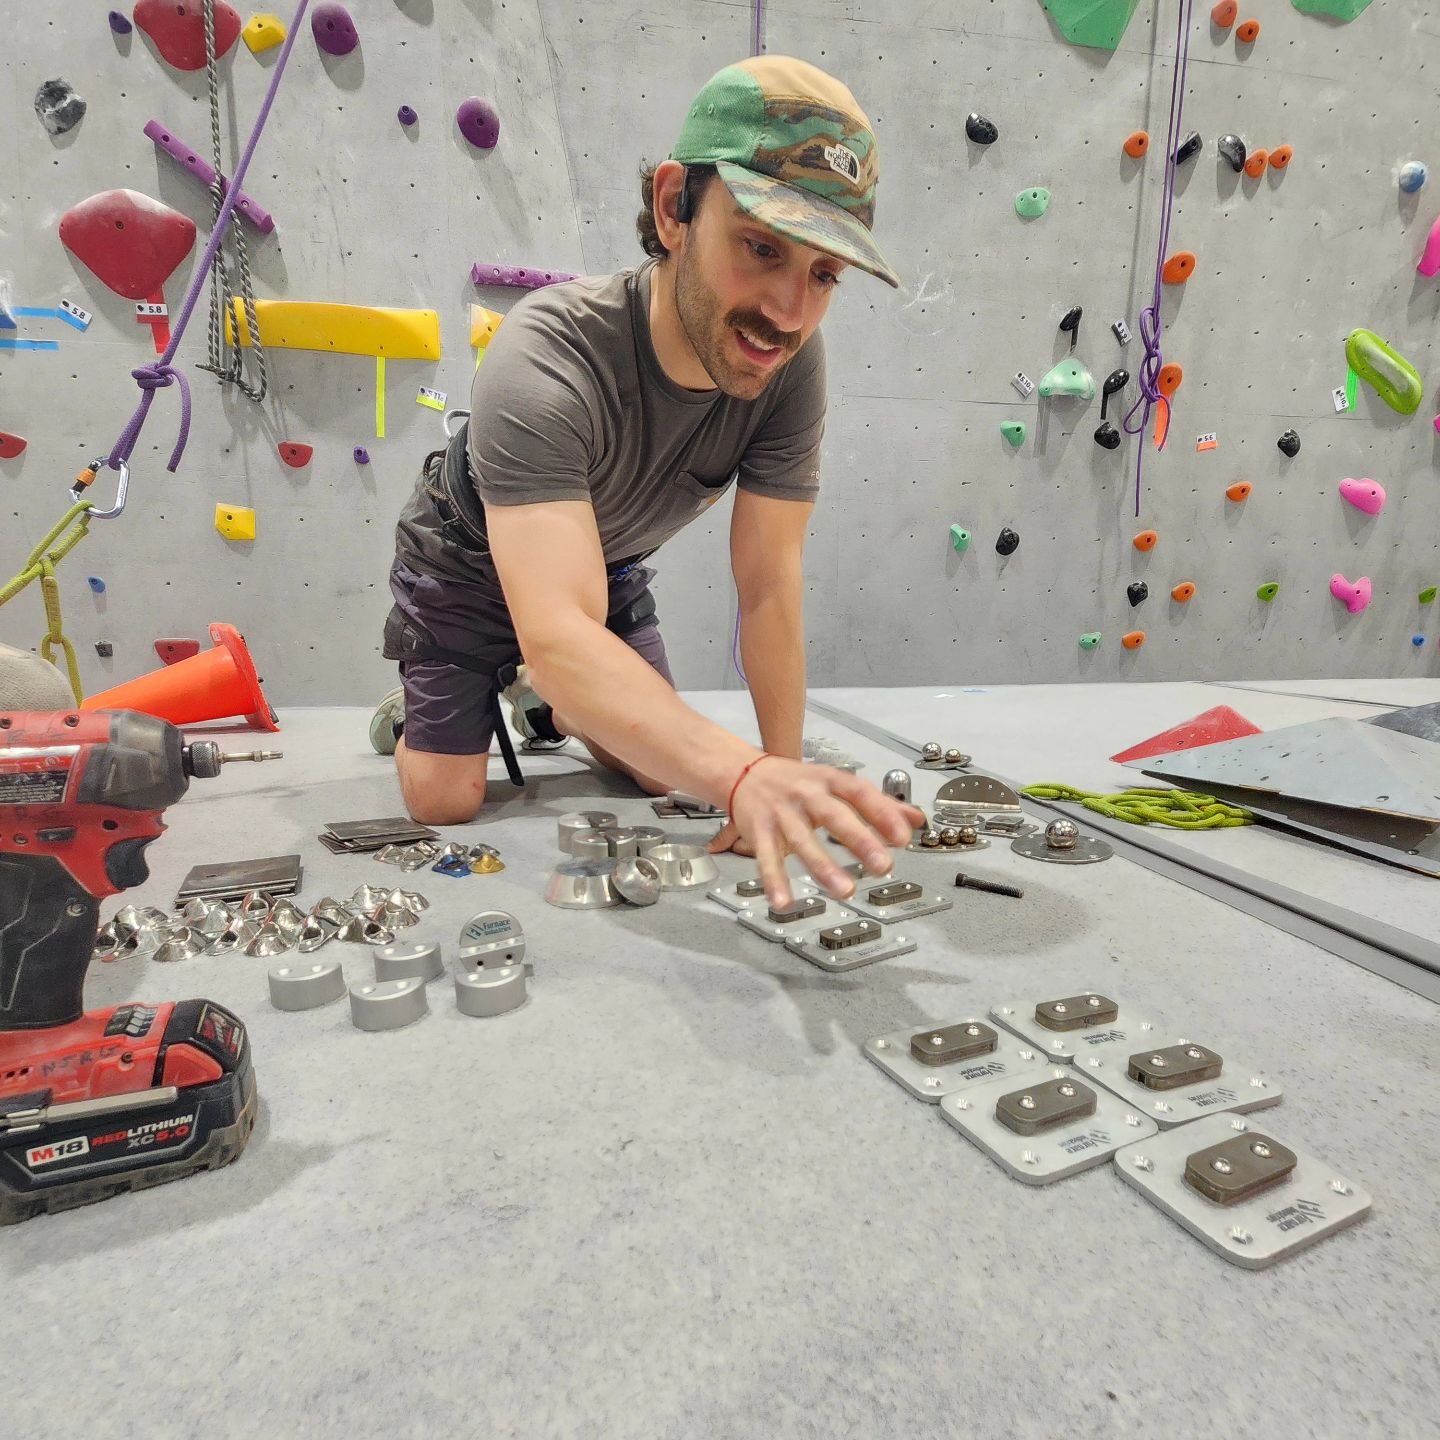 Setting new Drytooling routes along with testing out a few prototype holds with @greg_mg_love here at @njrockgym today 🔥🔥🔥

The ice season may be wrapping up but the drytooling season is just beginning to heat up!! 

#Drytooling 
#MixedClimbing
#F